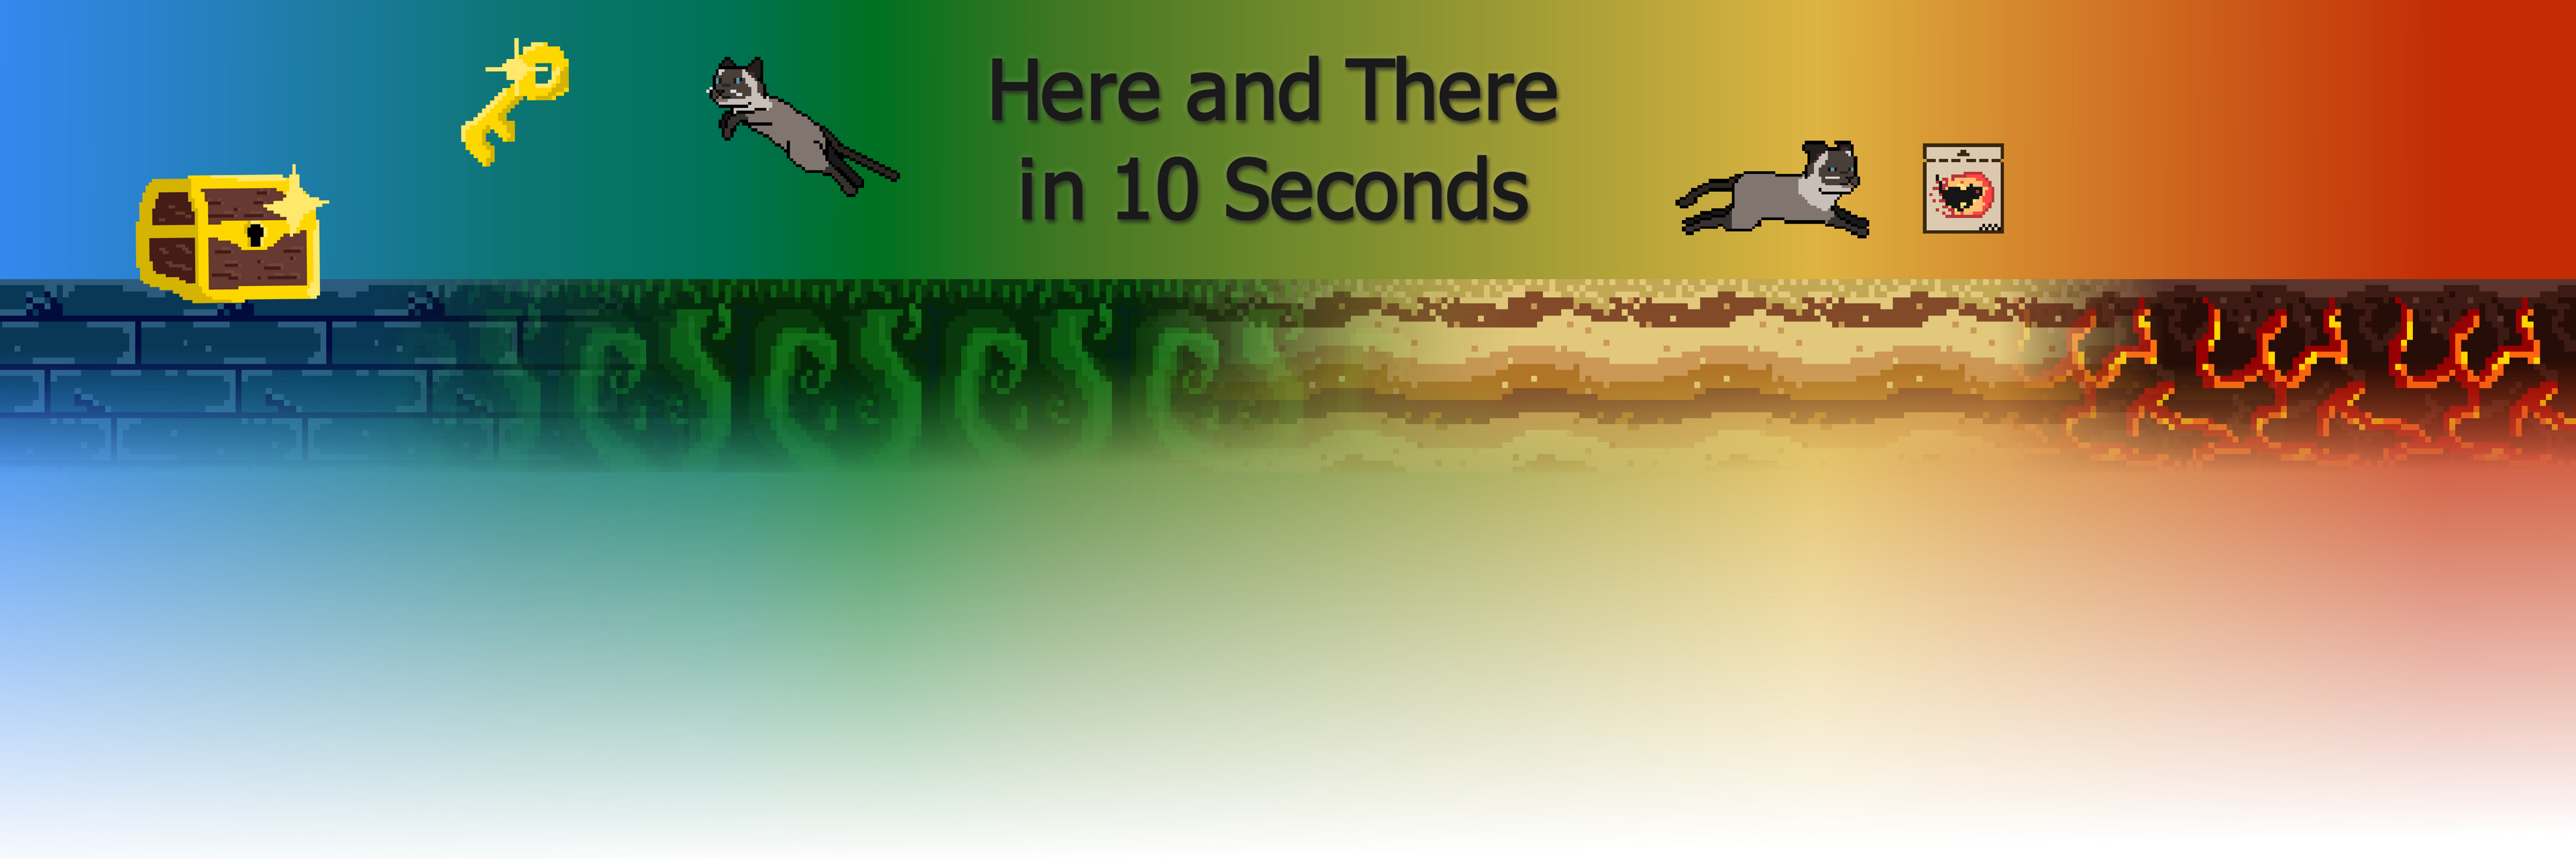 Here and There in 10 Seconds